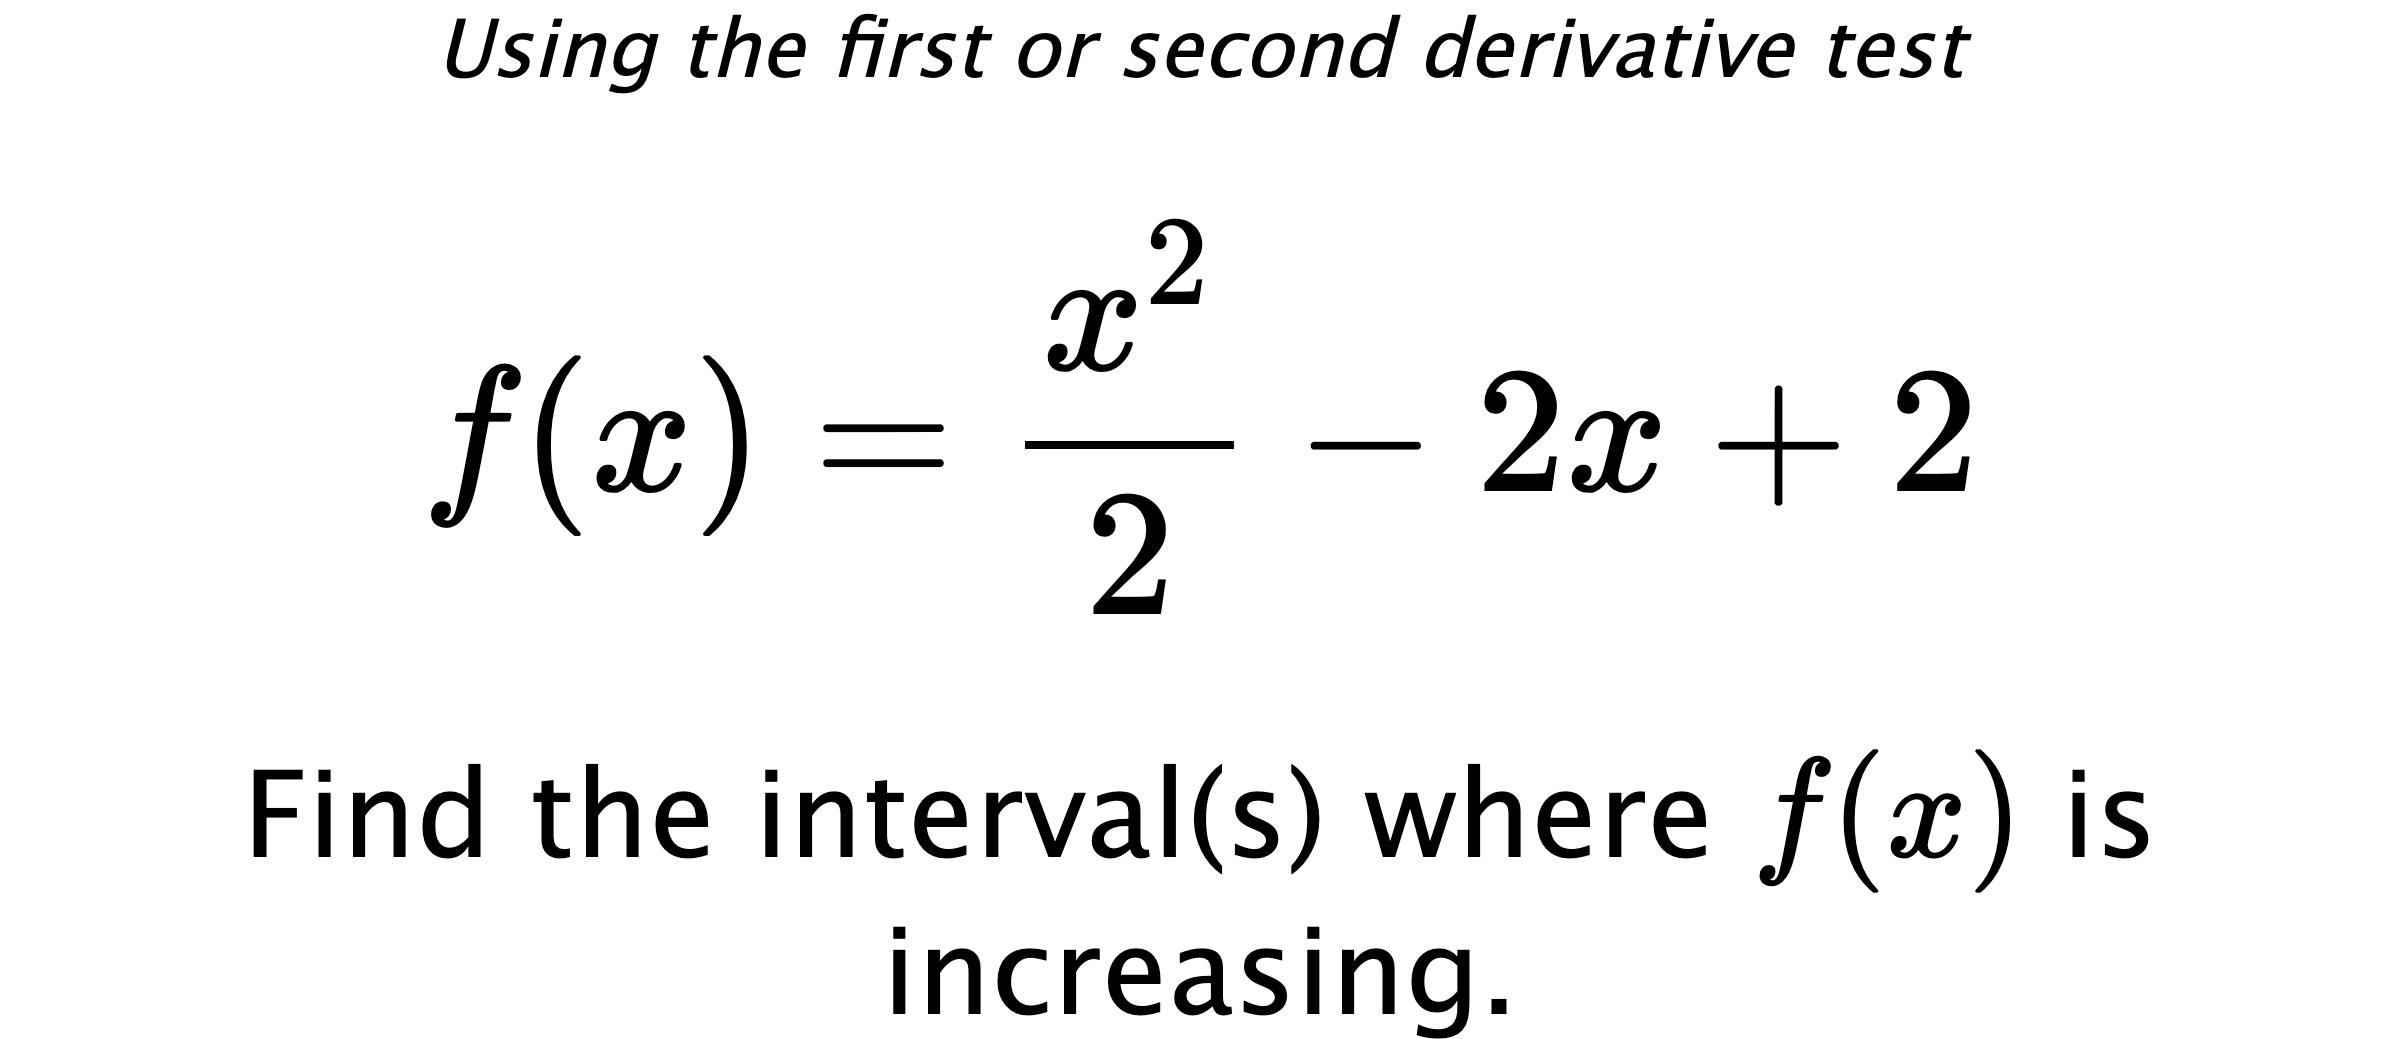 Using the first or second derivative test $$ f(x)=\frac{x^2}{2}-2x+2 $$ Find the interval(s) where $ f(x) $ is increasing.